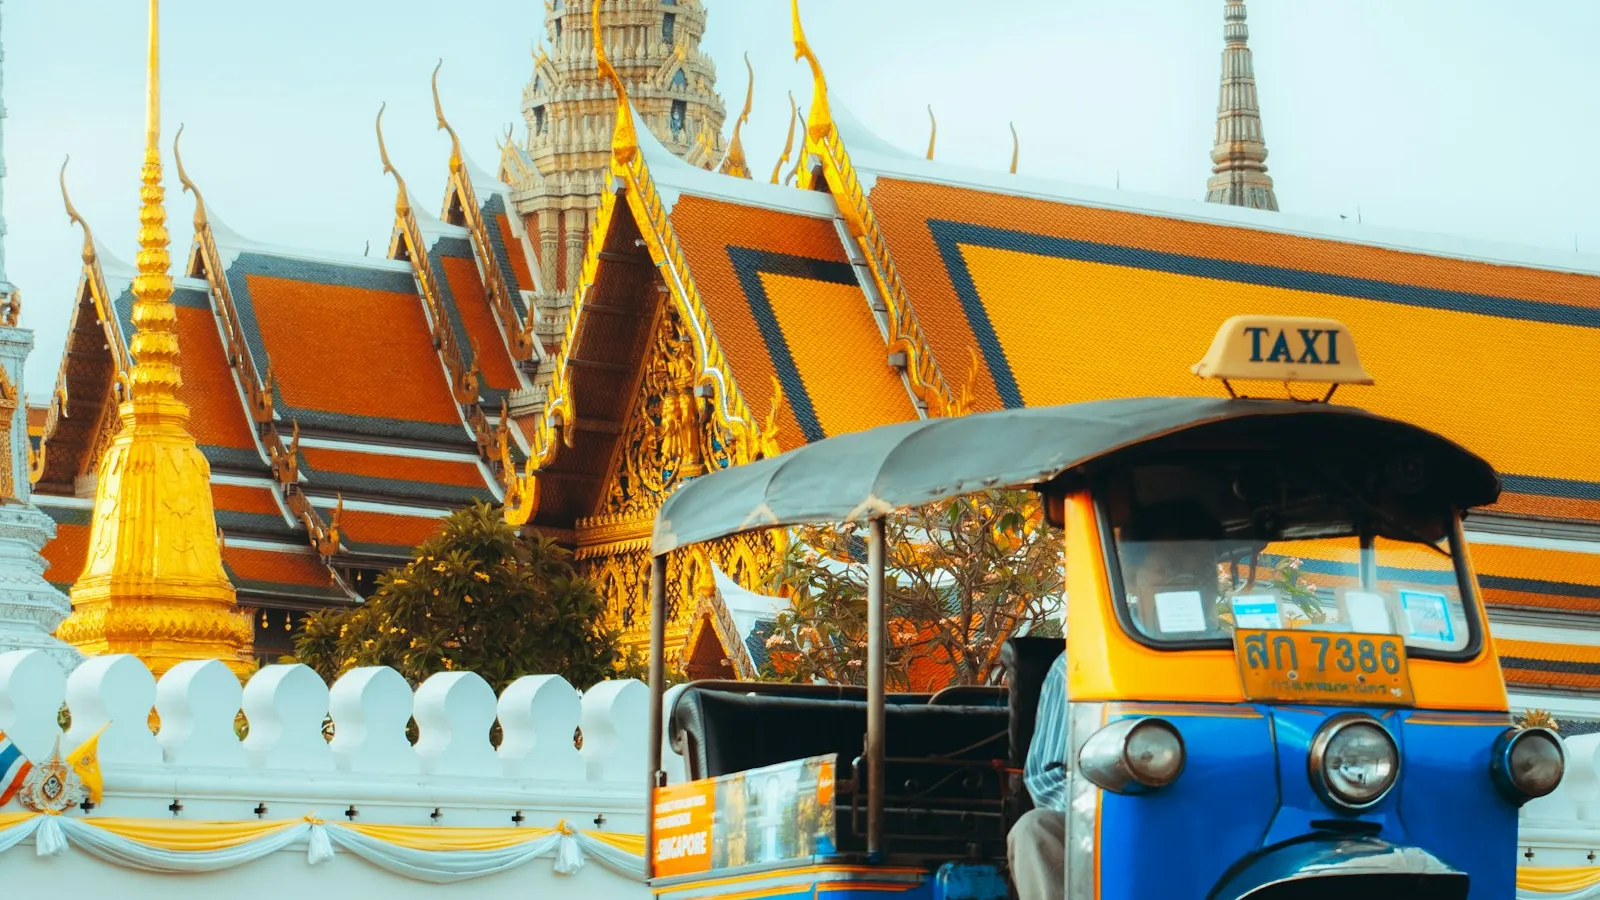 Beware of these top 10 scams in Bangkok targeting tourists. Learn how to spot, react, and avoid falling victim while enjoying your trip.